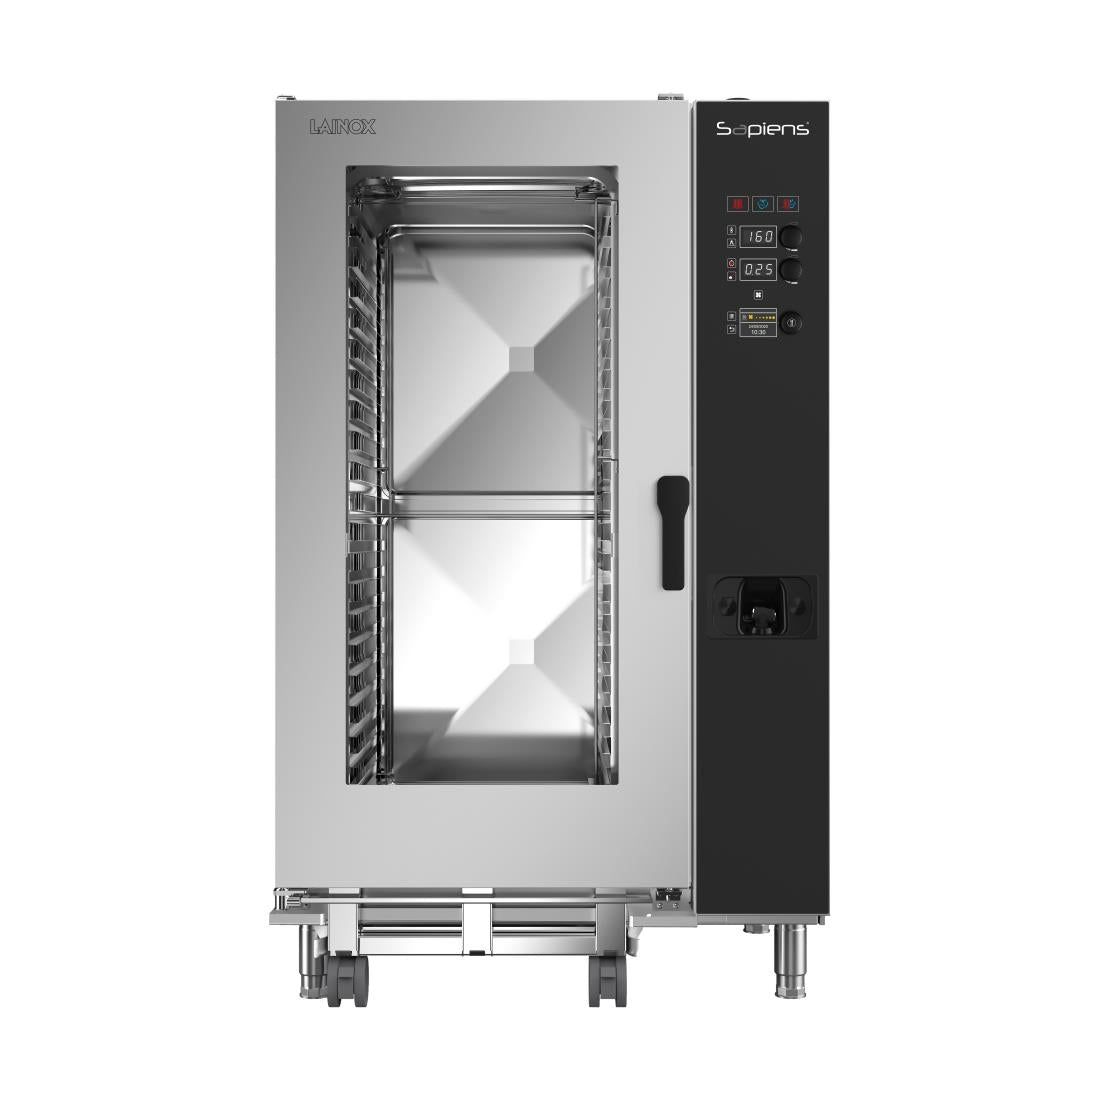 HP588 Lainox Sapiens Boosted Electric Touch Screen Combi Oven SAE202BV 20X2/1GN JD Catering Equipment Solutions Ltd